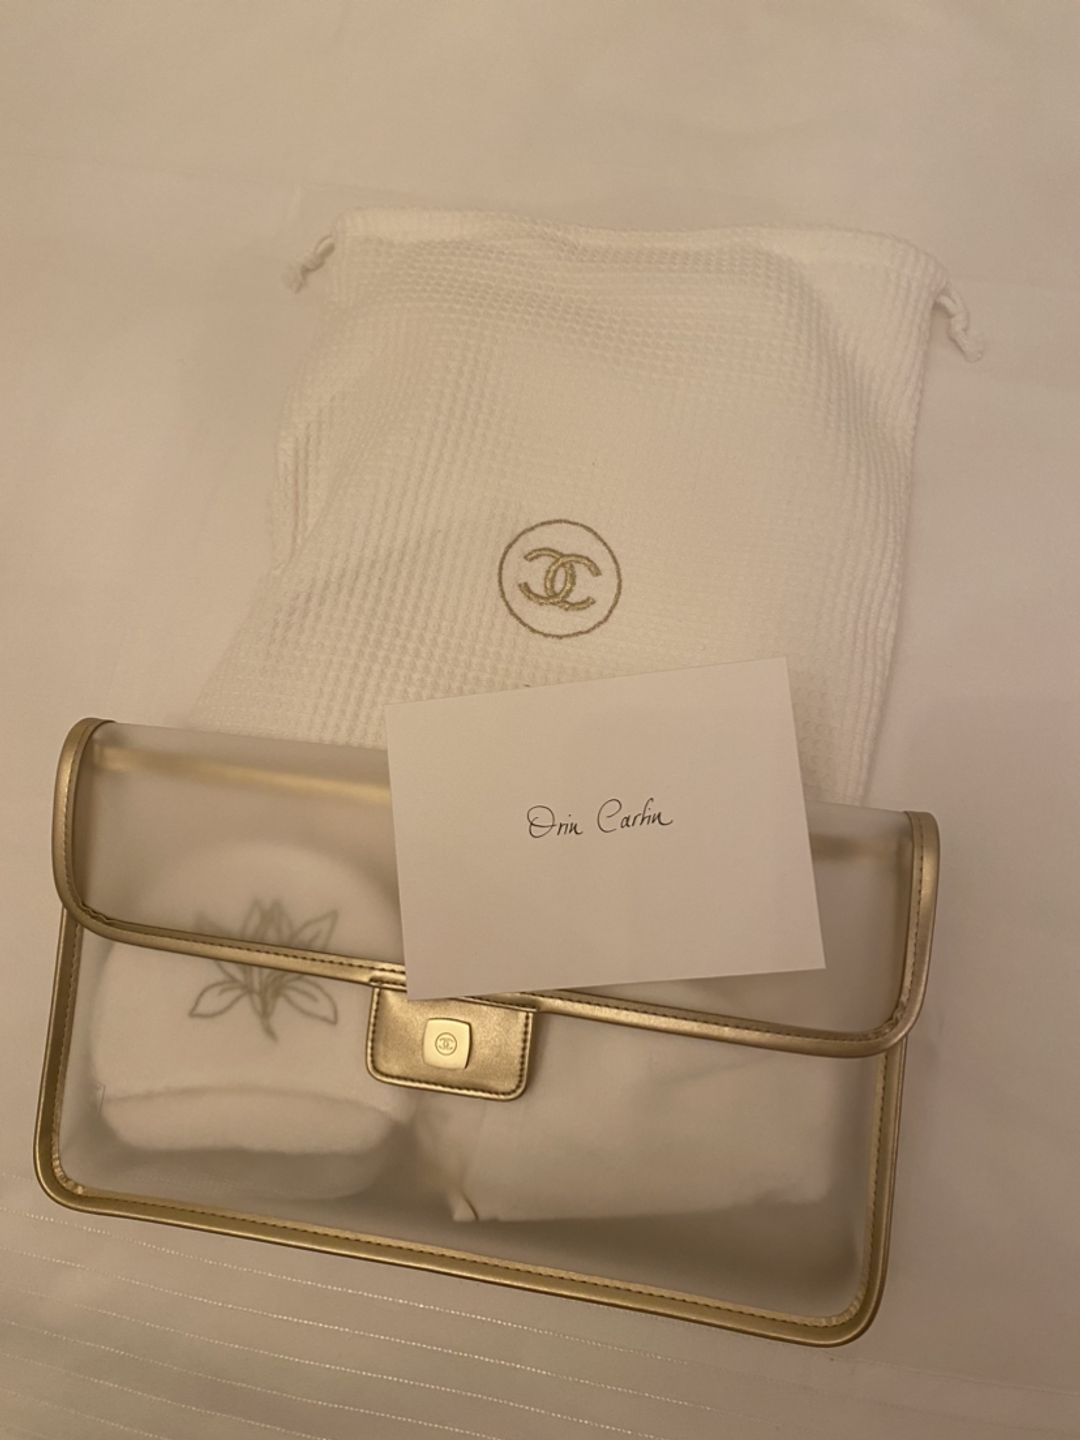 Chanel towel, skincare package and envelope 